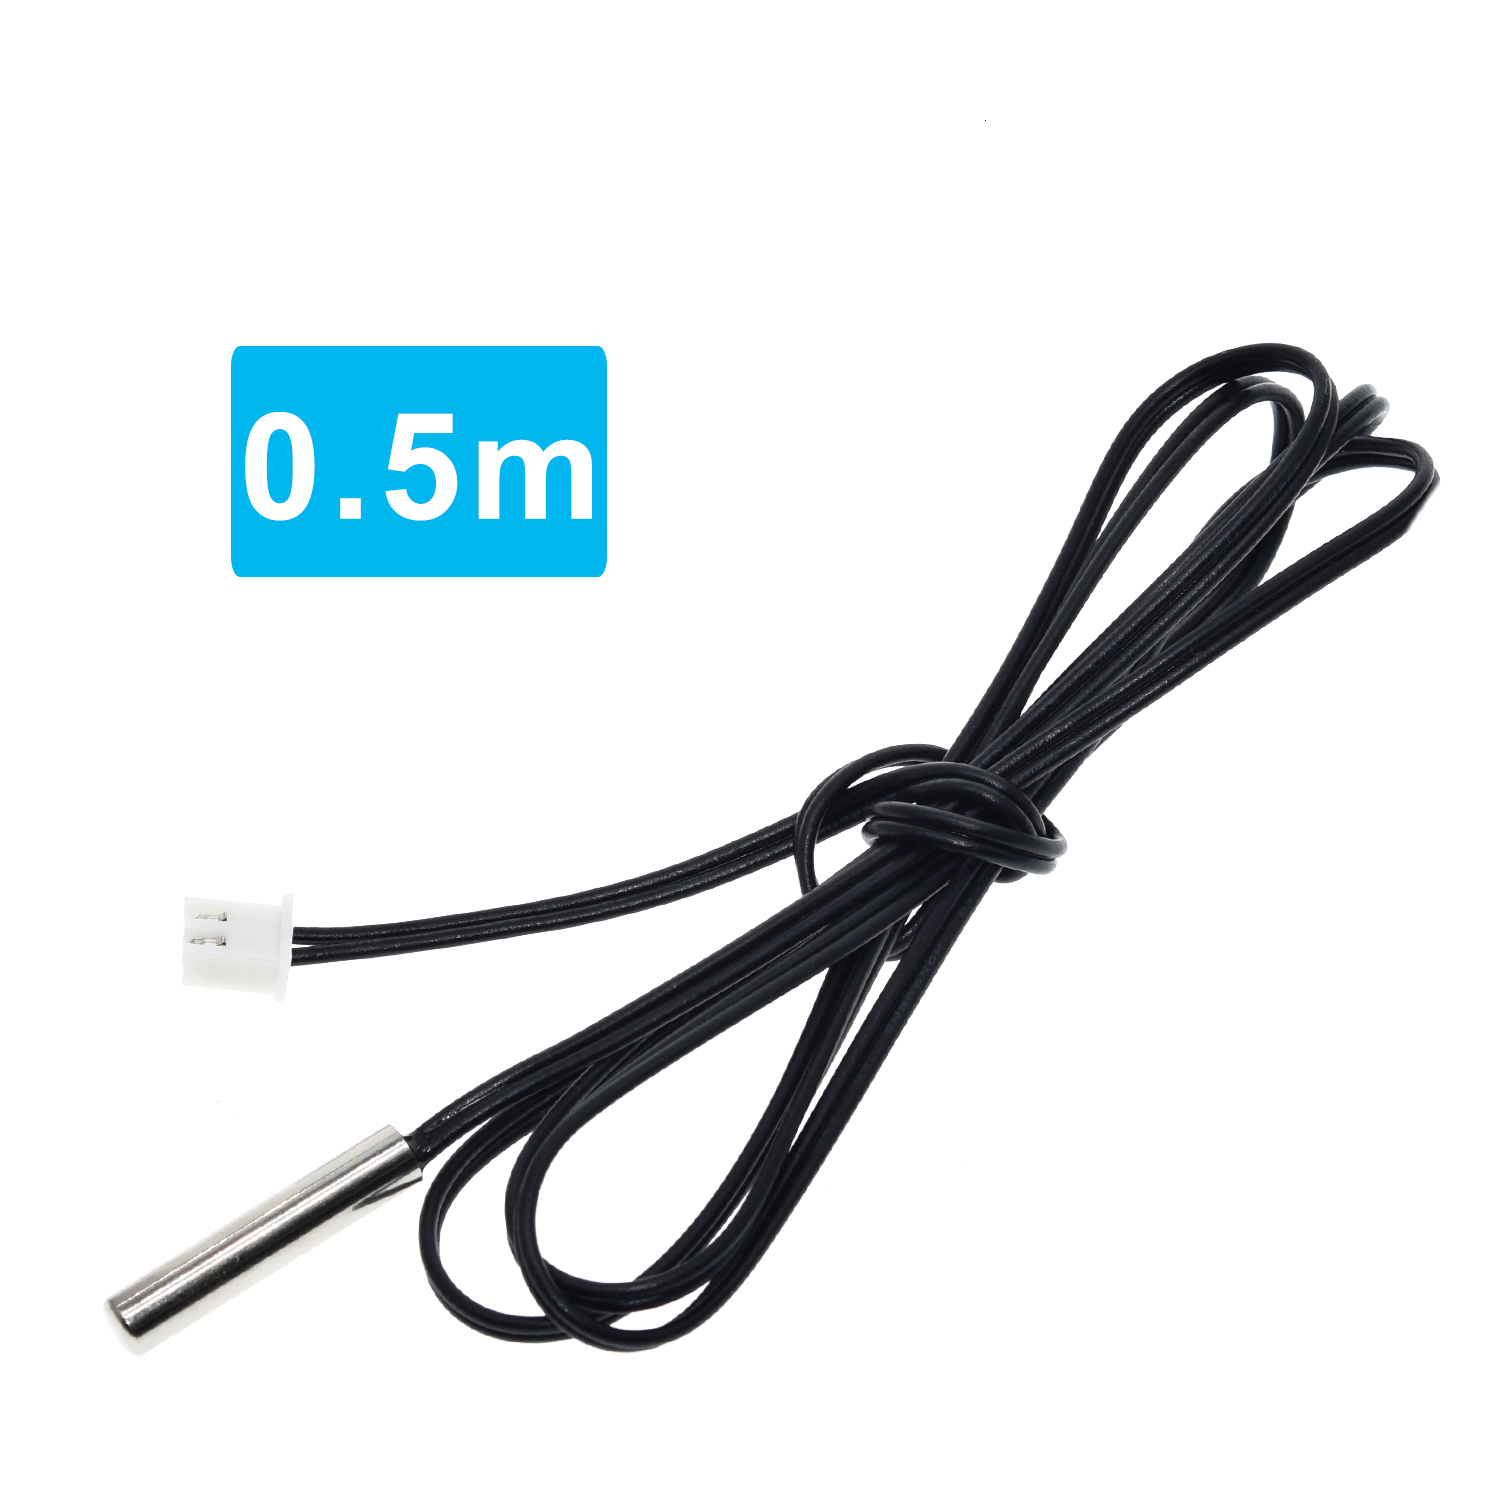 dImg1_0.5M Cable10.jpg